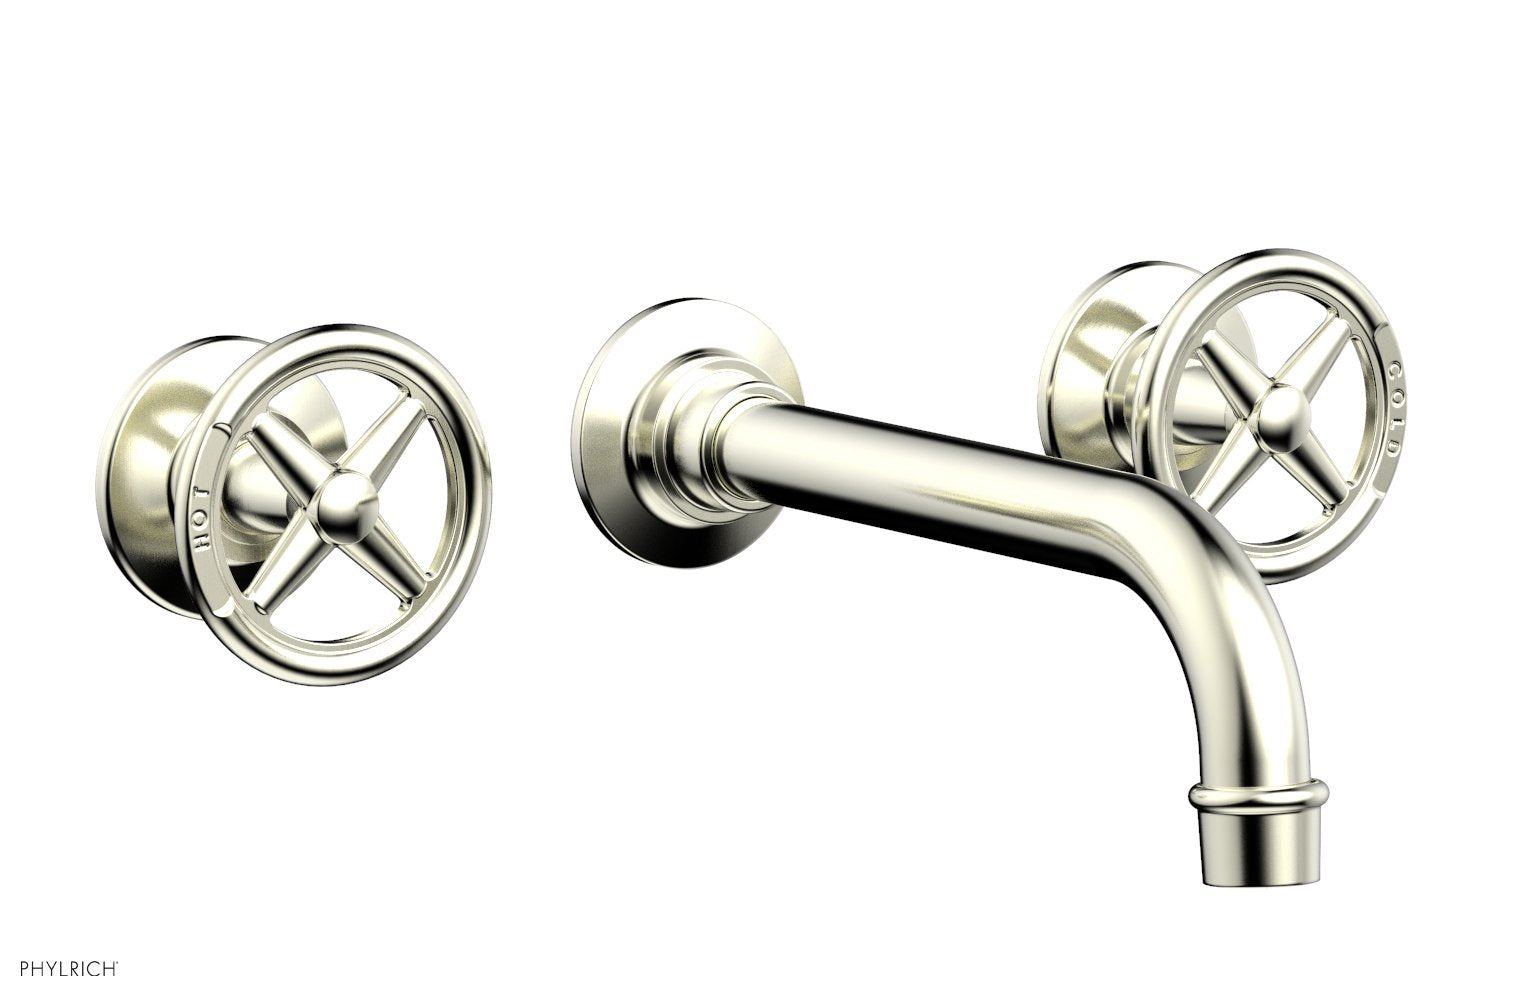 Phylrich WORKS Wall Lavatory Set - Cross Handles